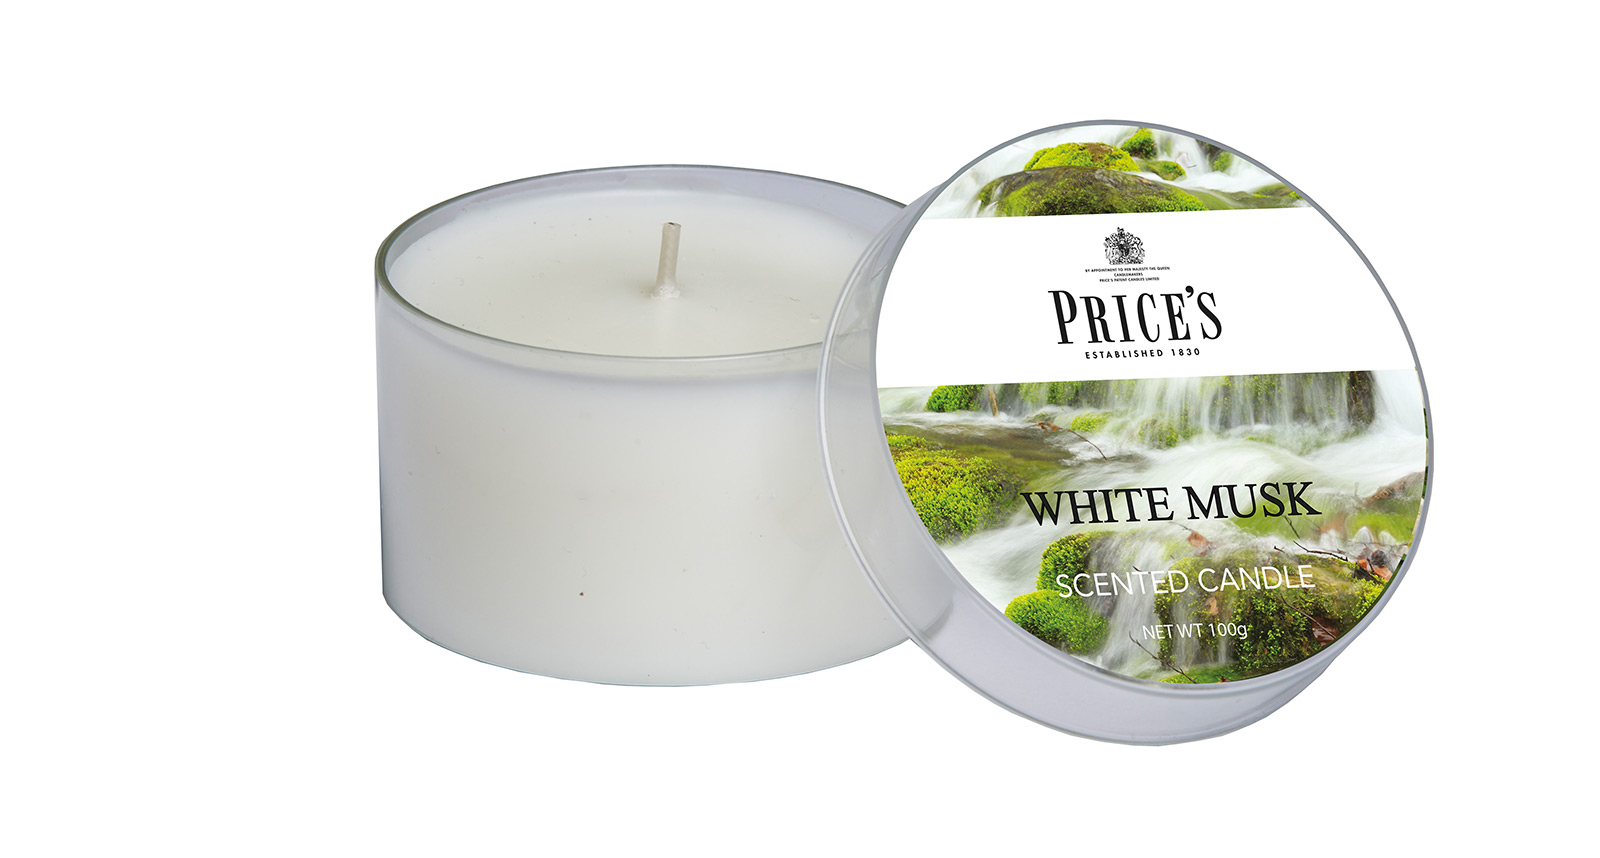 Prices Candle "White Musk" 100g      